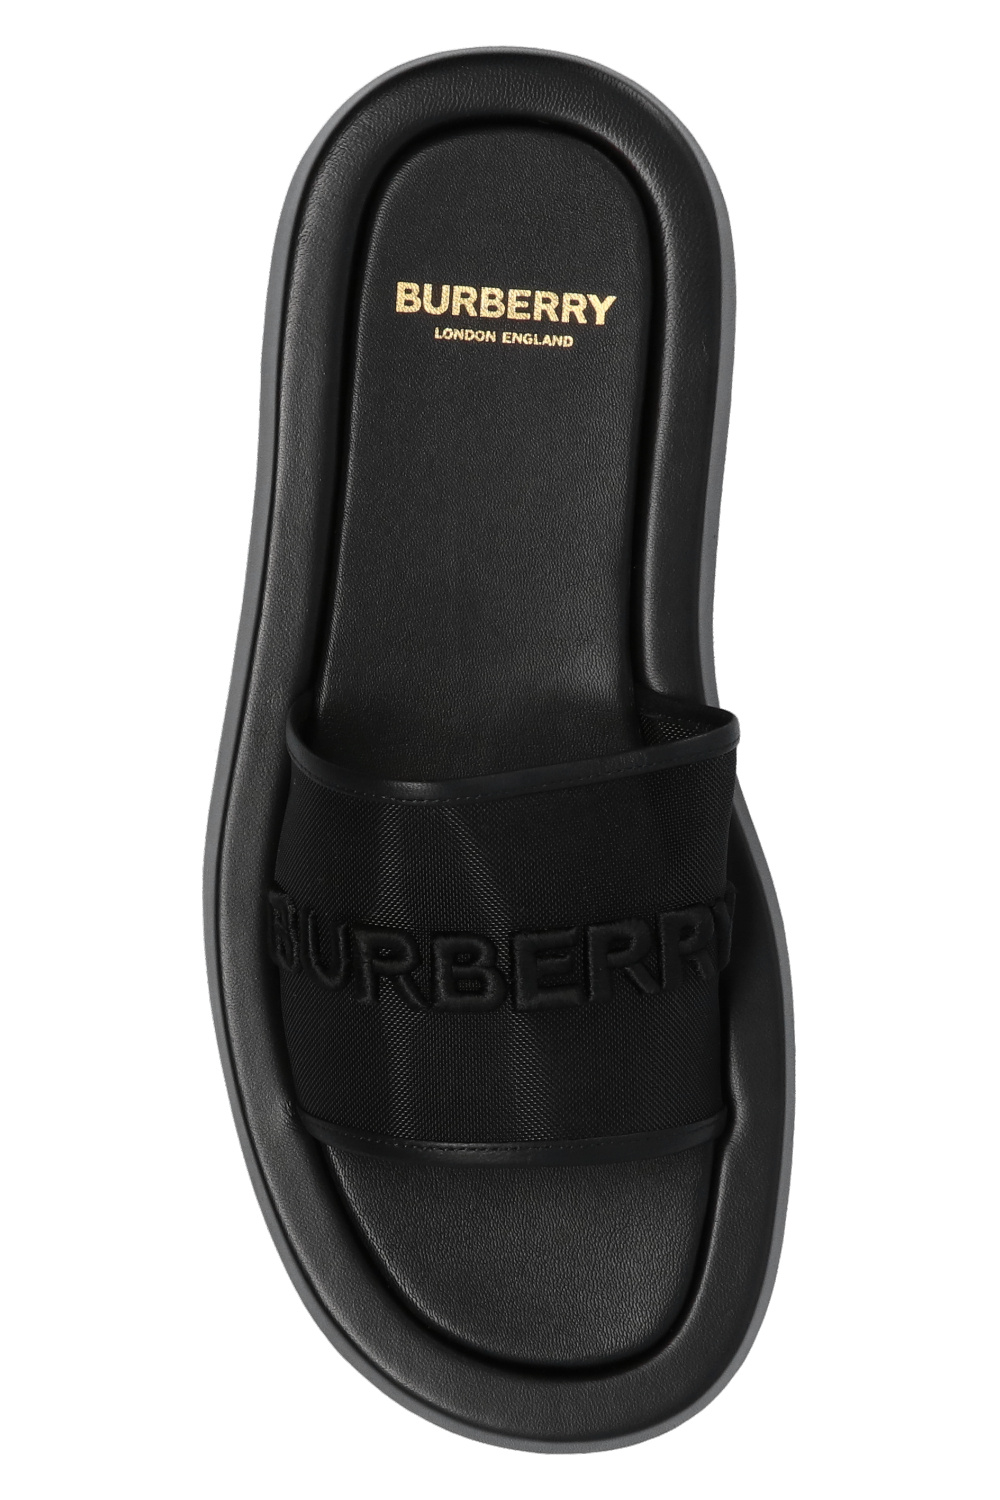 burberry beige Slides with logo